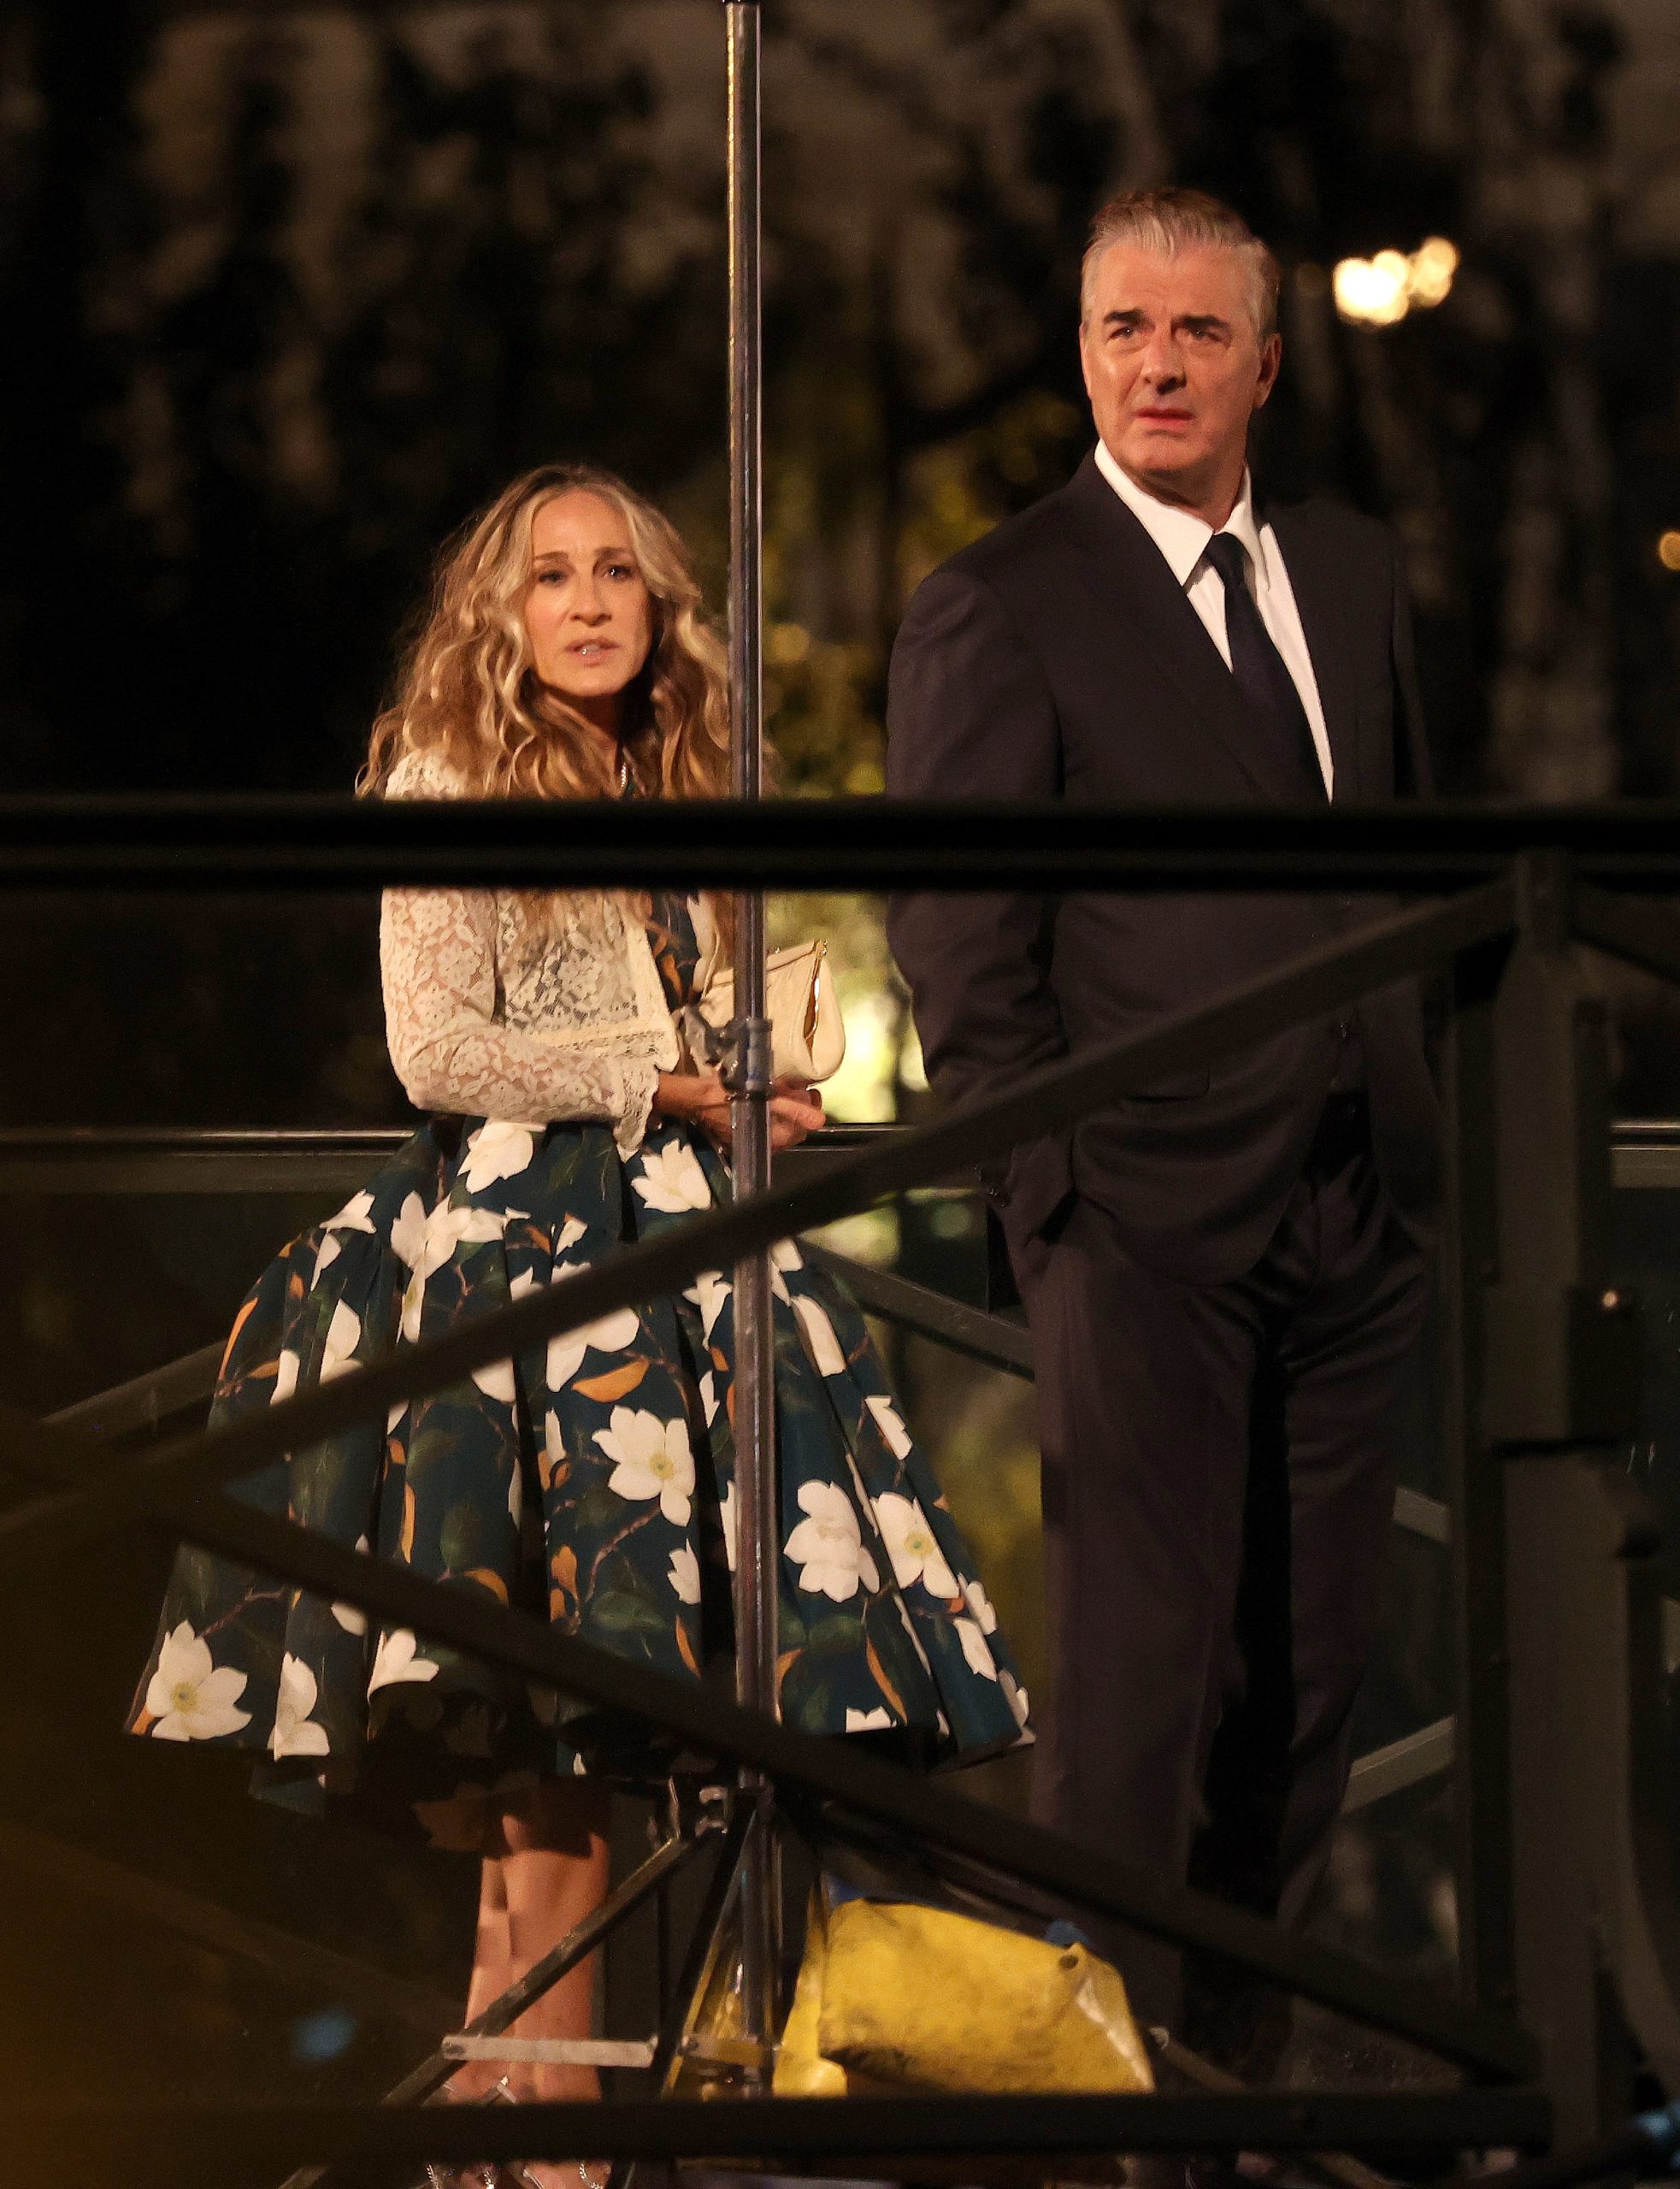 Carrie & Big Are Back In PARISSSS! 